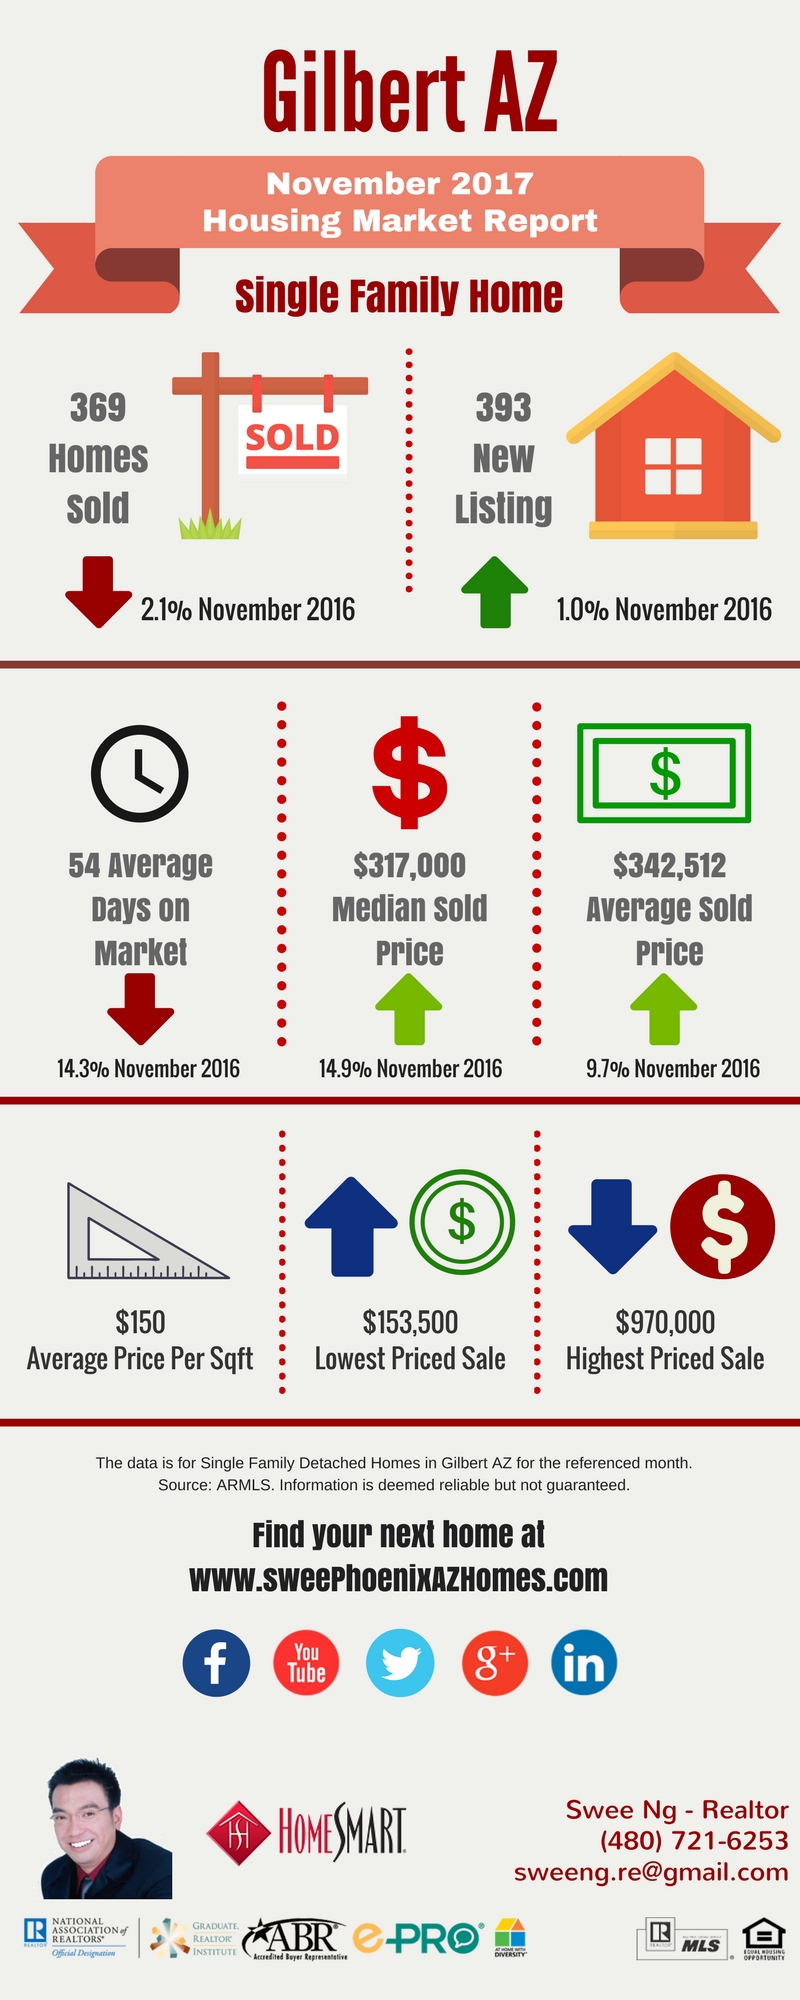 Gilbert AZ Housing Market Trends Report November 2017 by Swee Ng, Real Estate and House Value